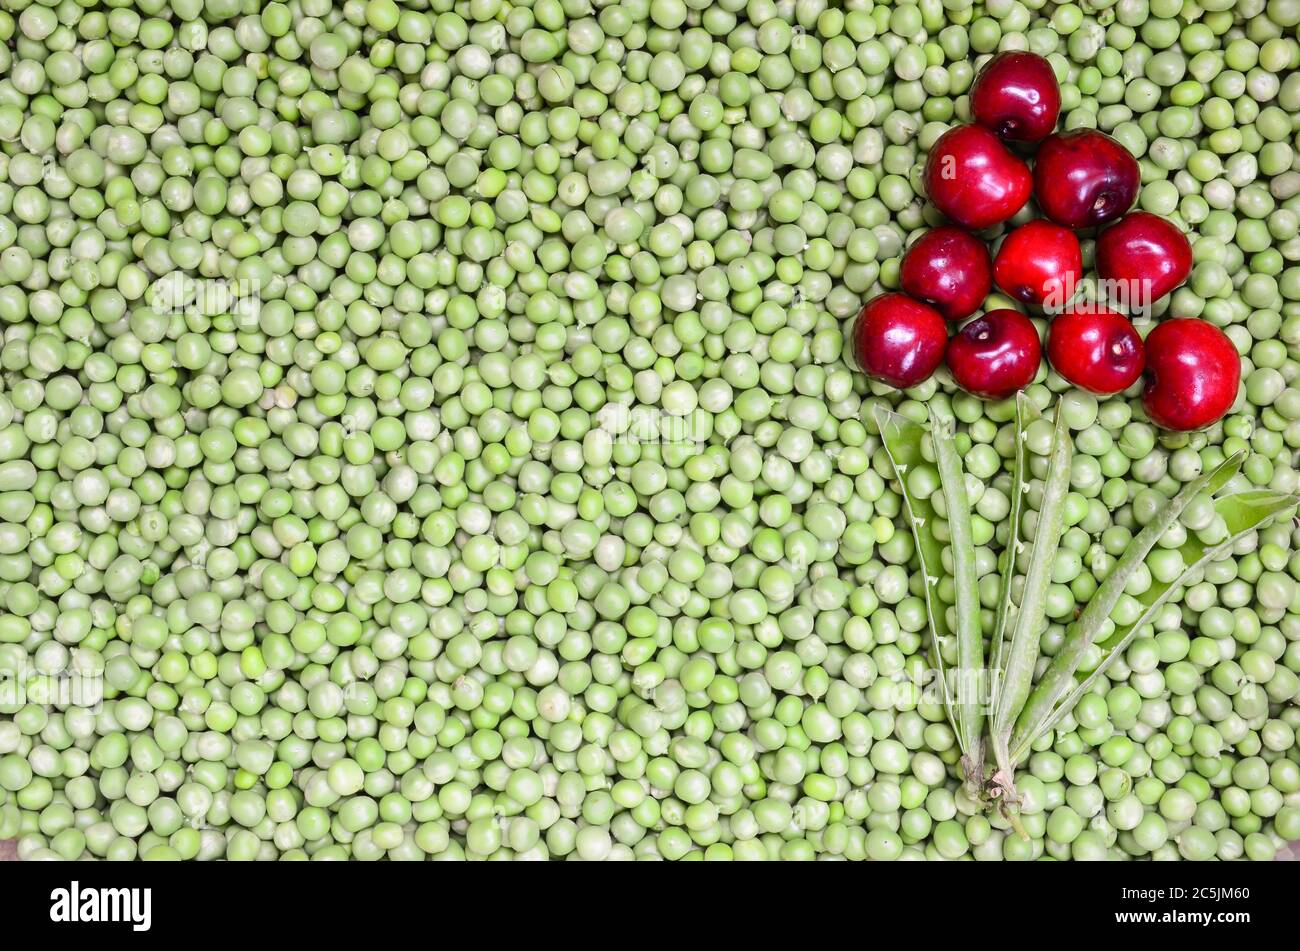 Cherries and peas background, flower shape made of fresh, ripe cherries and pea pods on shelled peas Stock Photo